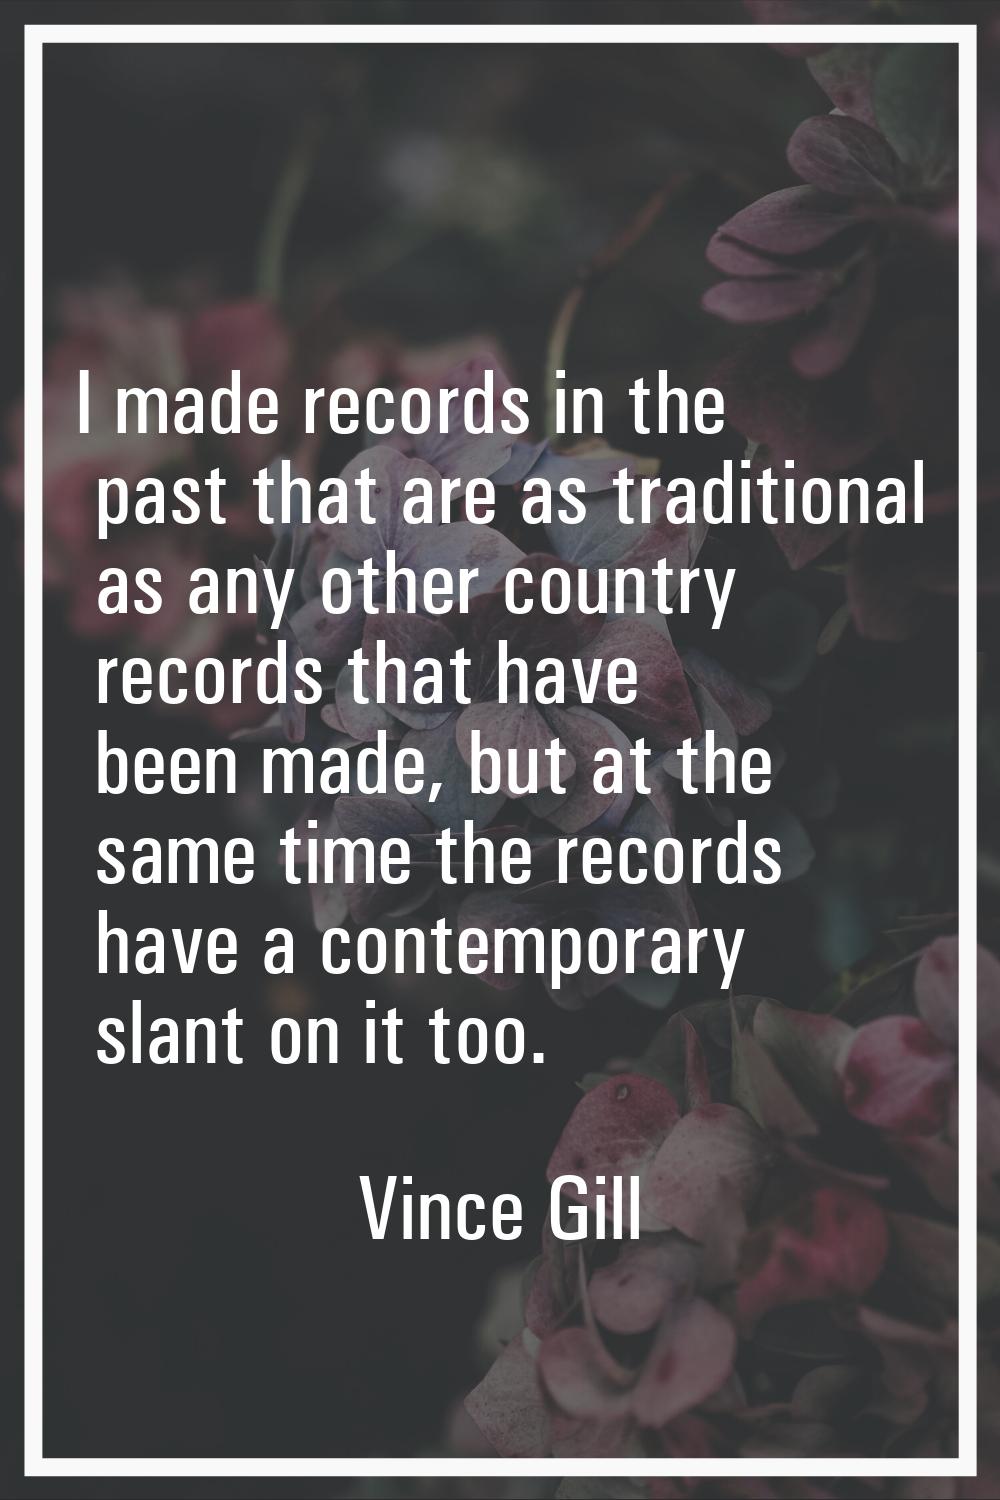 I made records in the past that are as traditional as any other country records that have been made